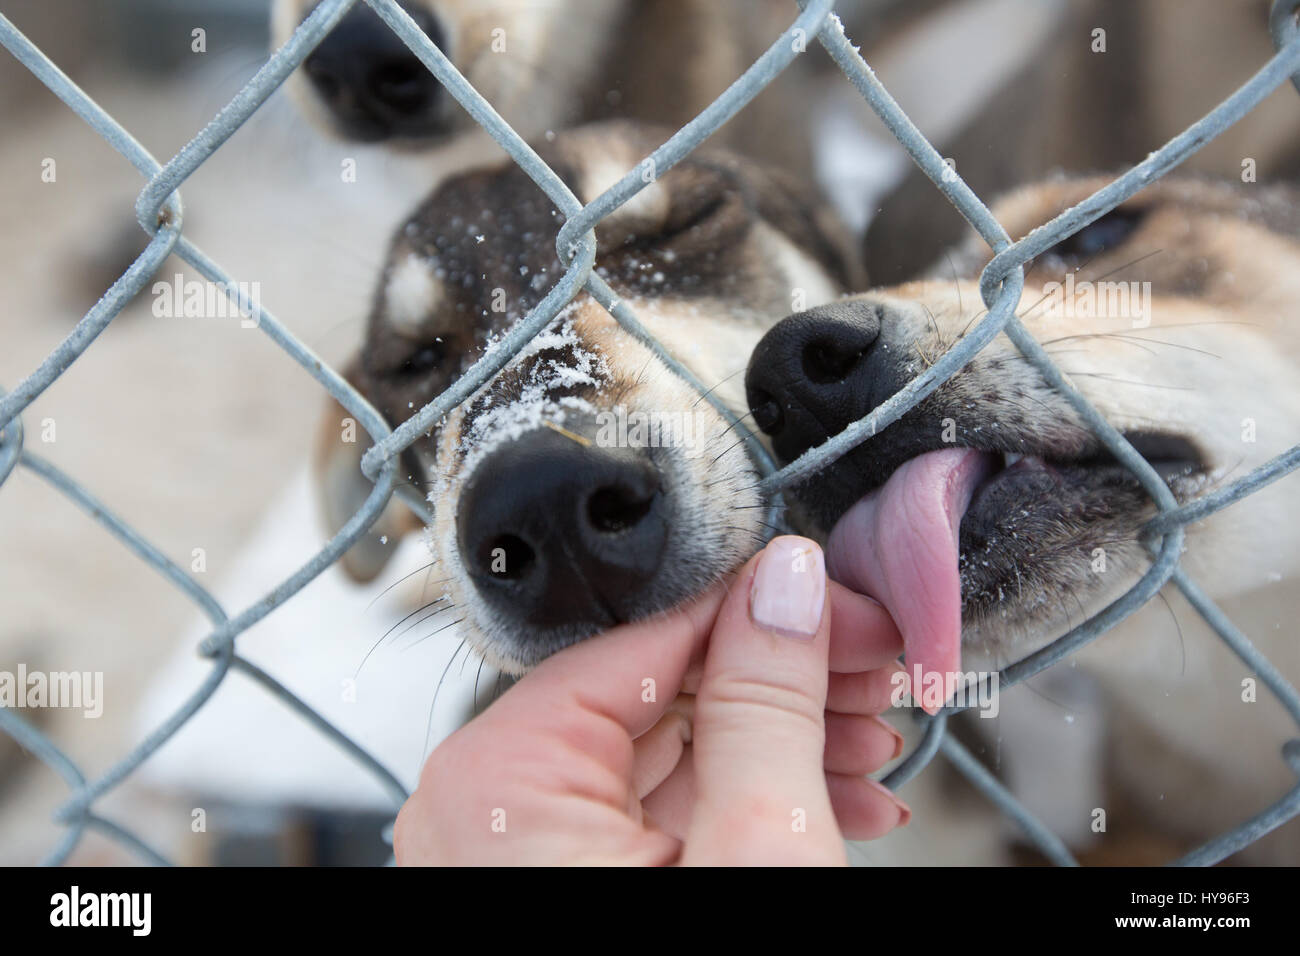 2 cute sled dogs with snowflakes on their faces licking a woman's hand through a chain fence Stock Photo